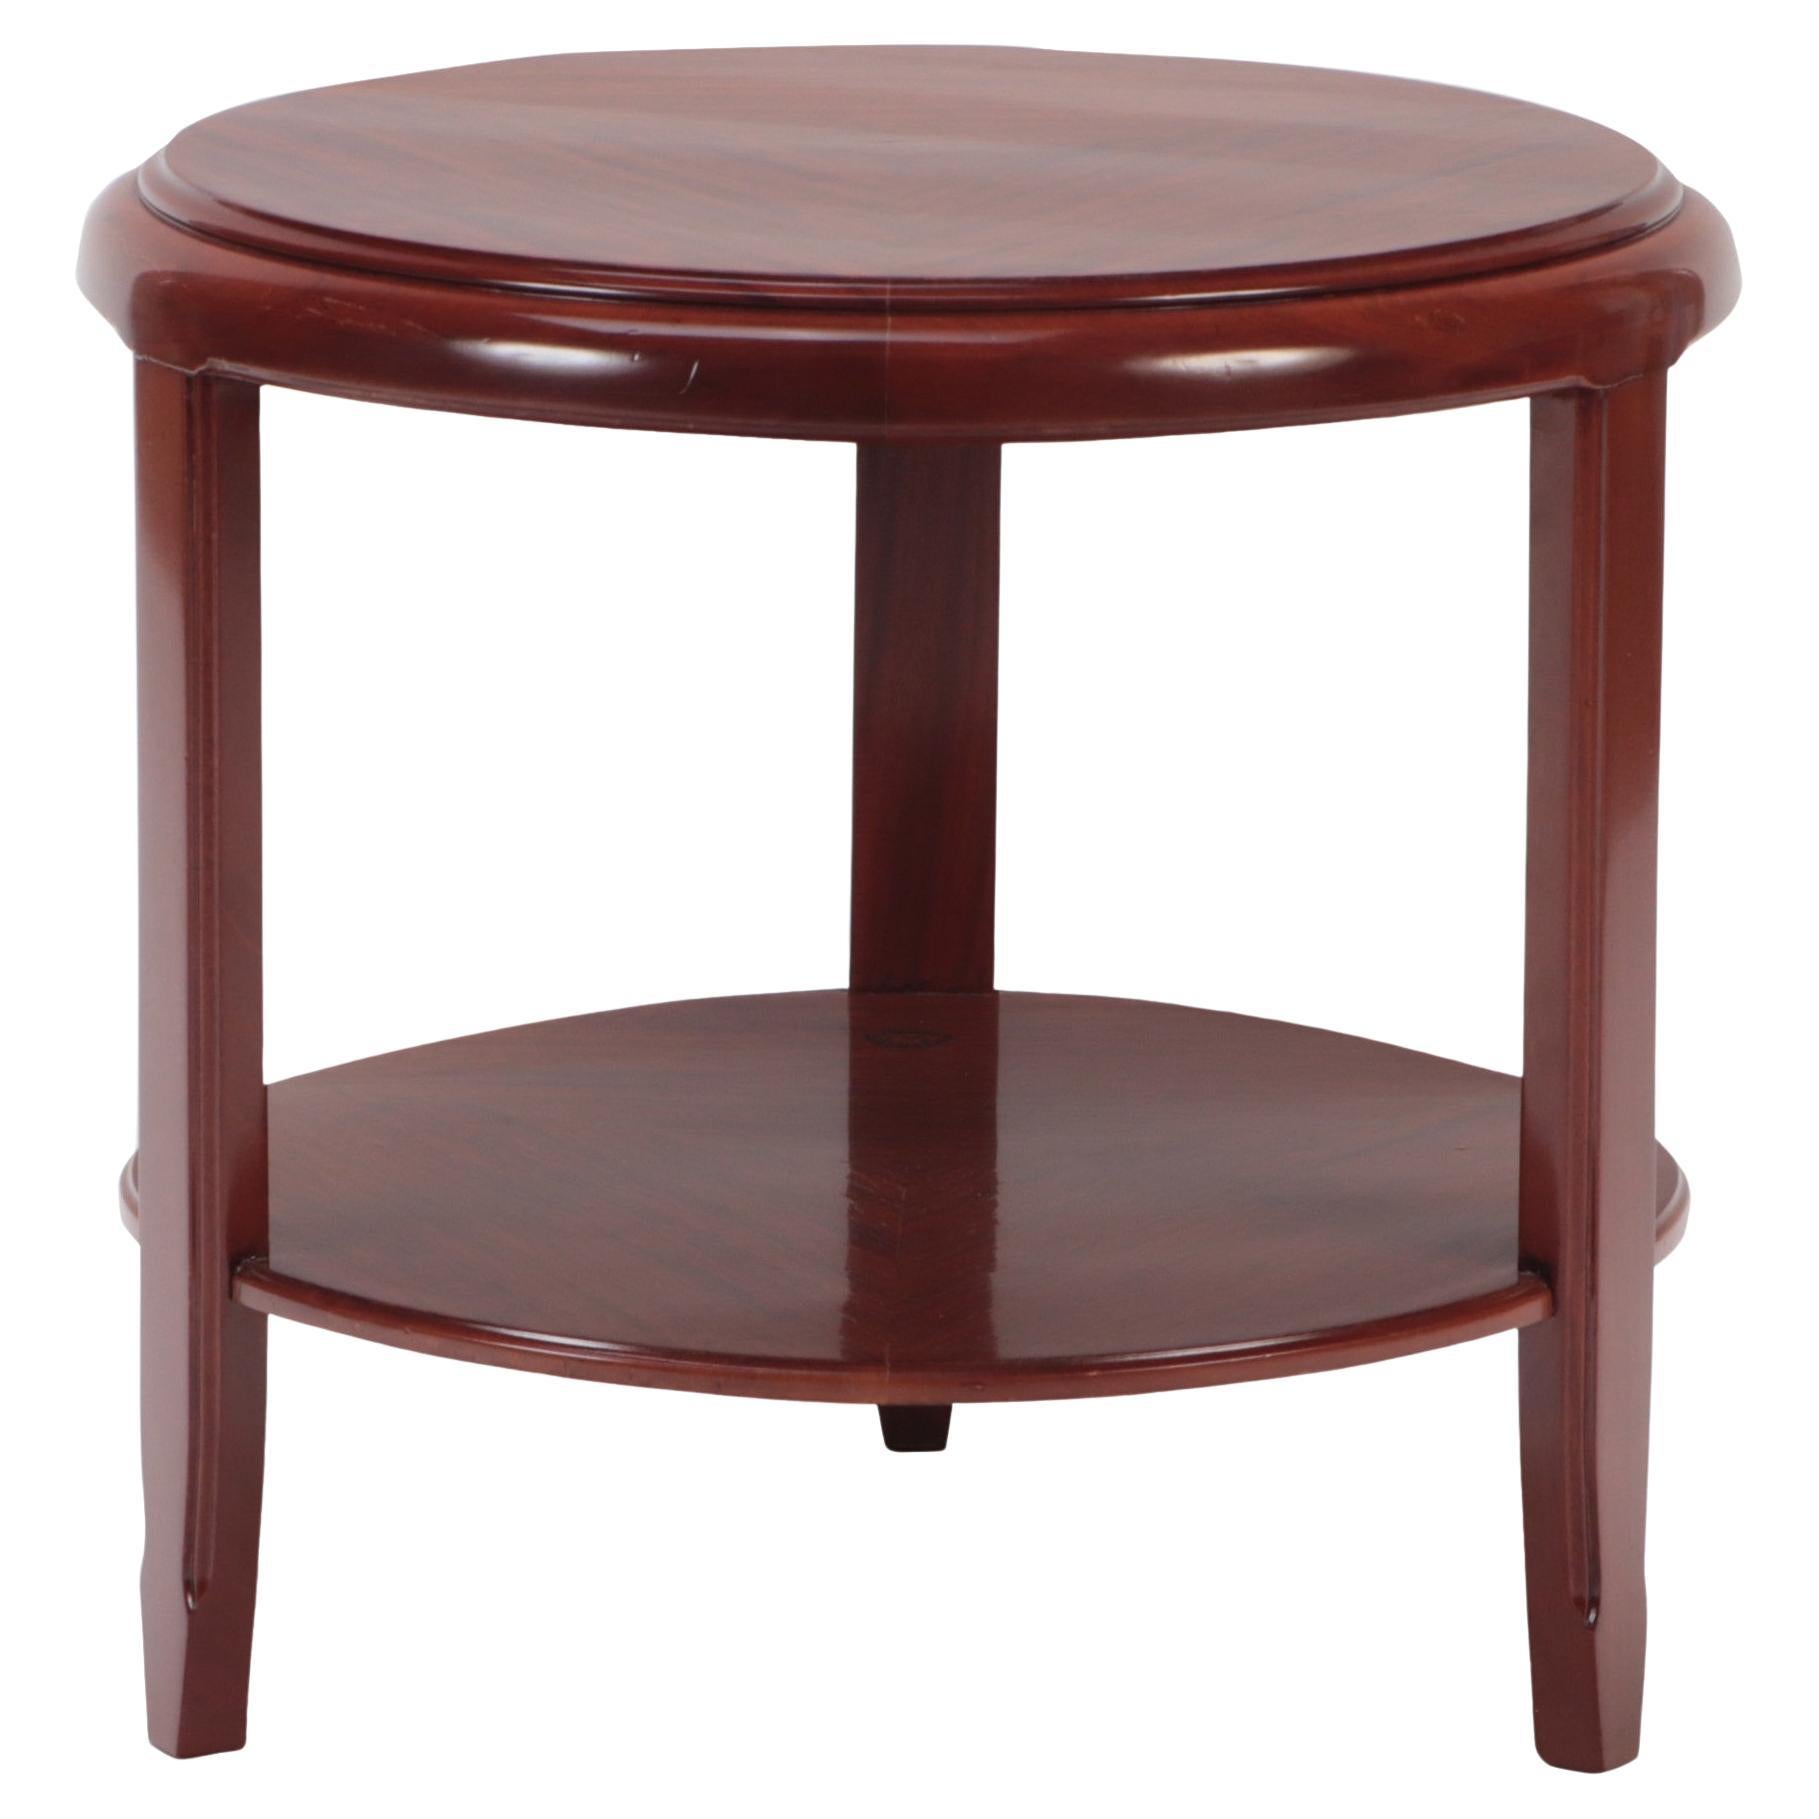 French Art Deco Mahogany Side Table by Louis Majorelle, Signed, Circa 1930